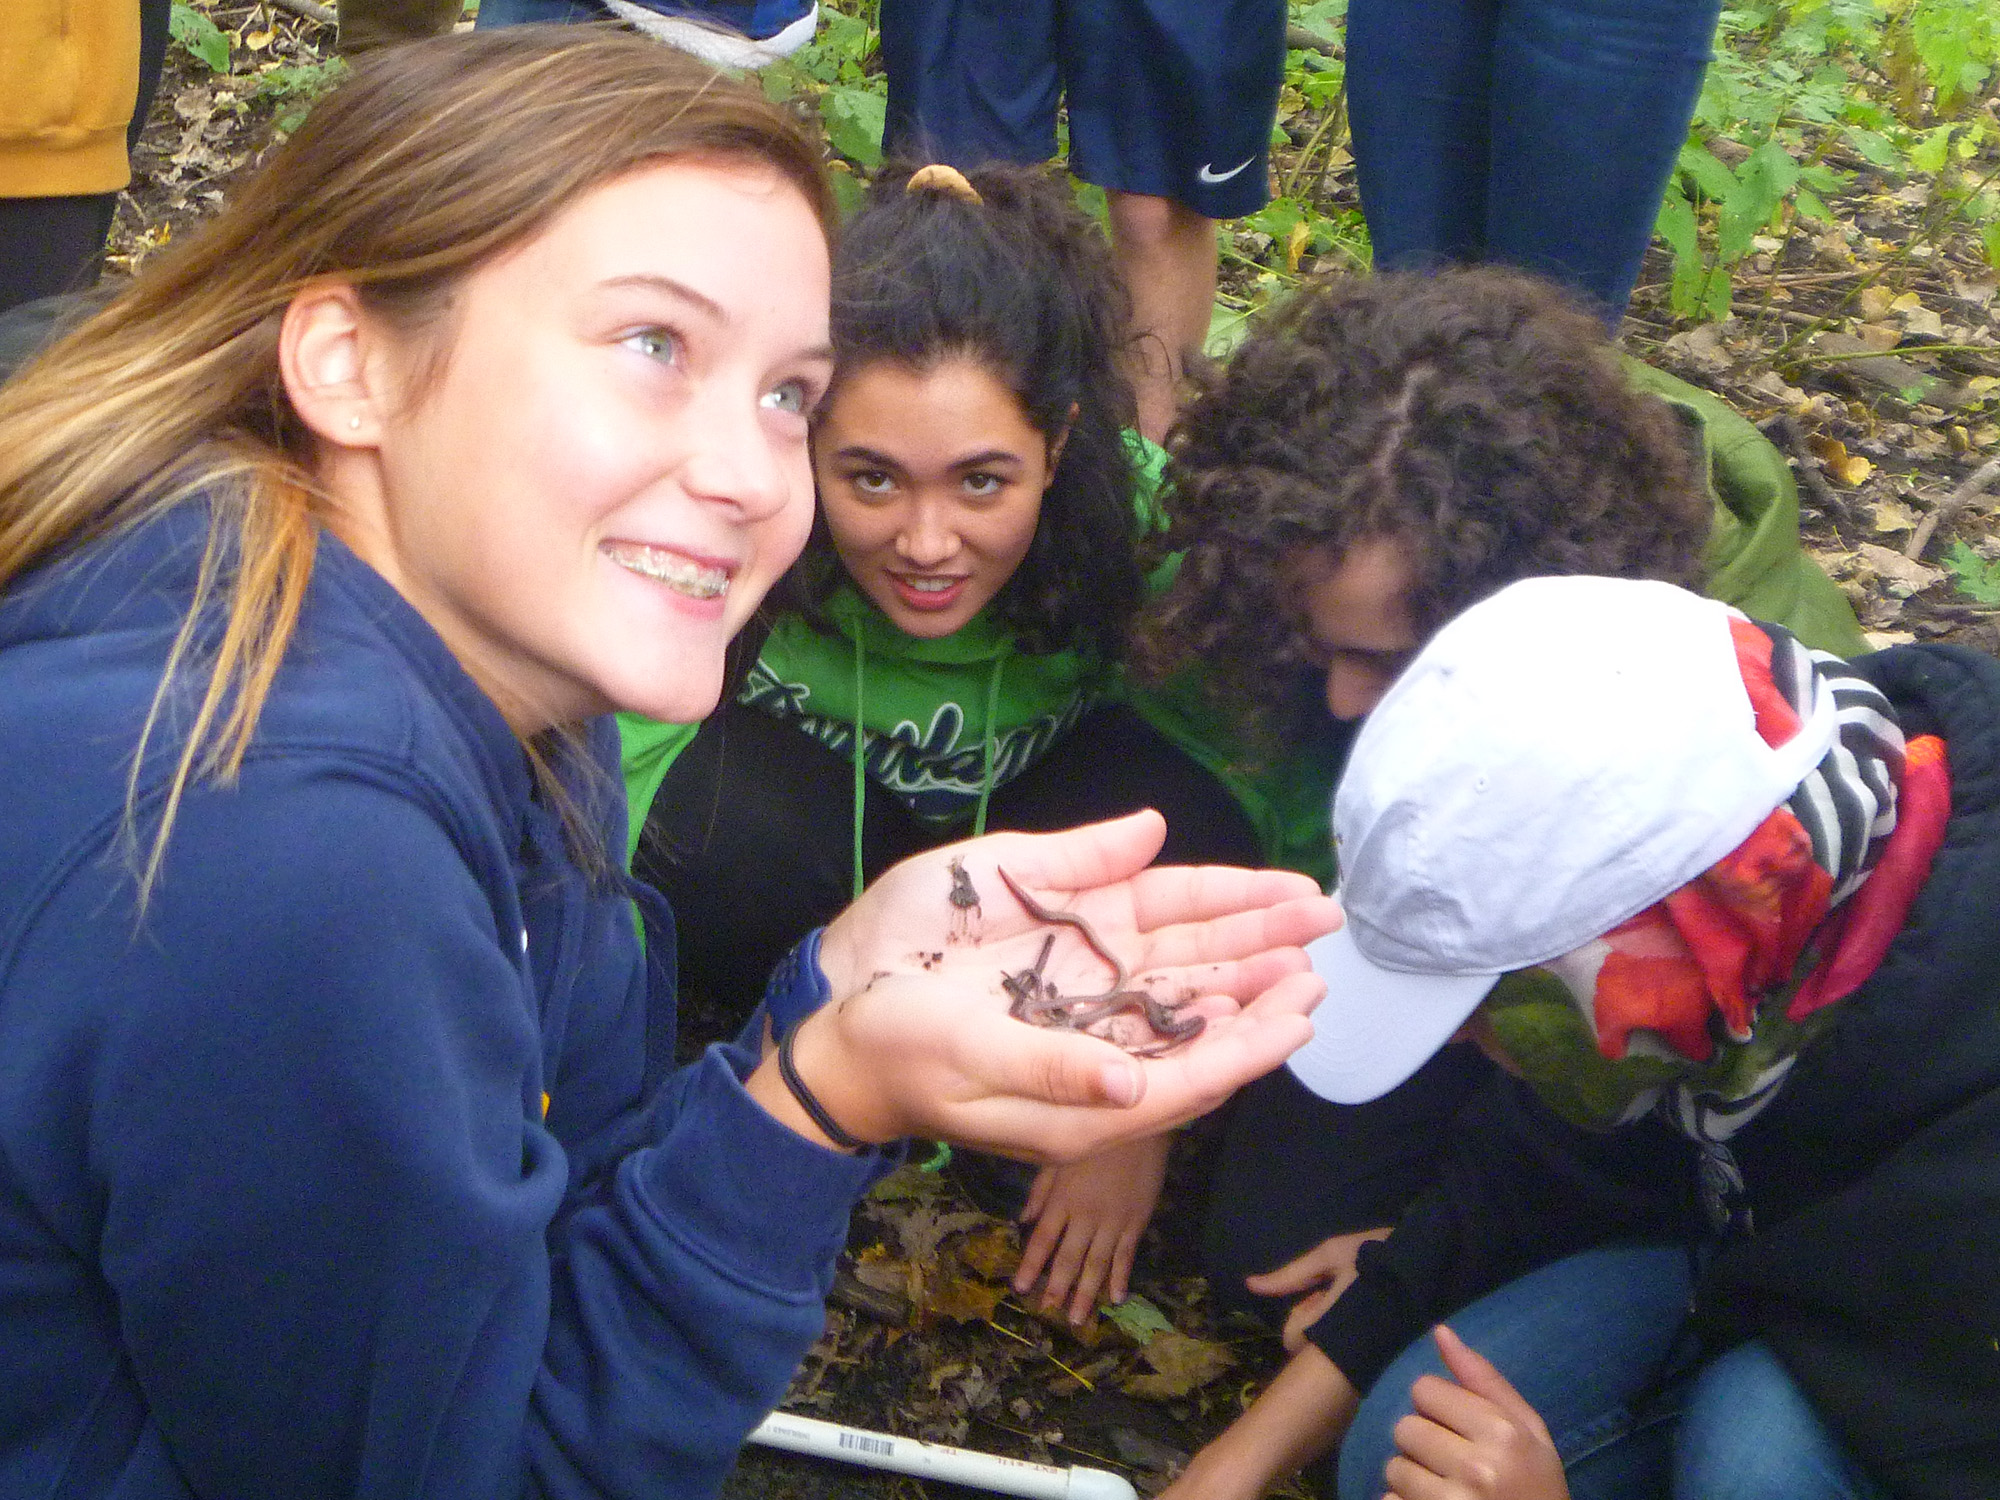 High school students hold earthworms